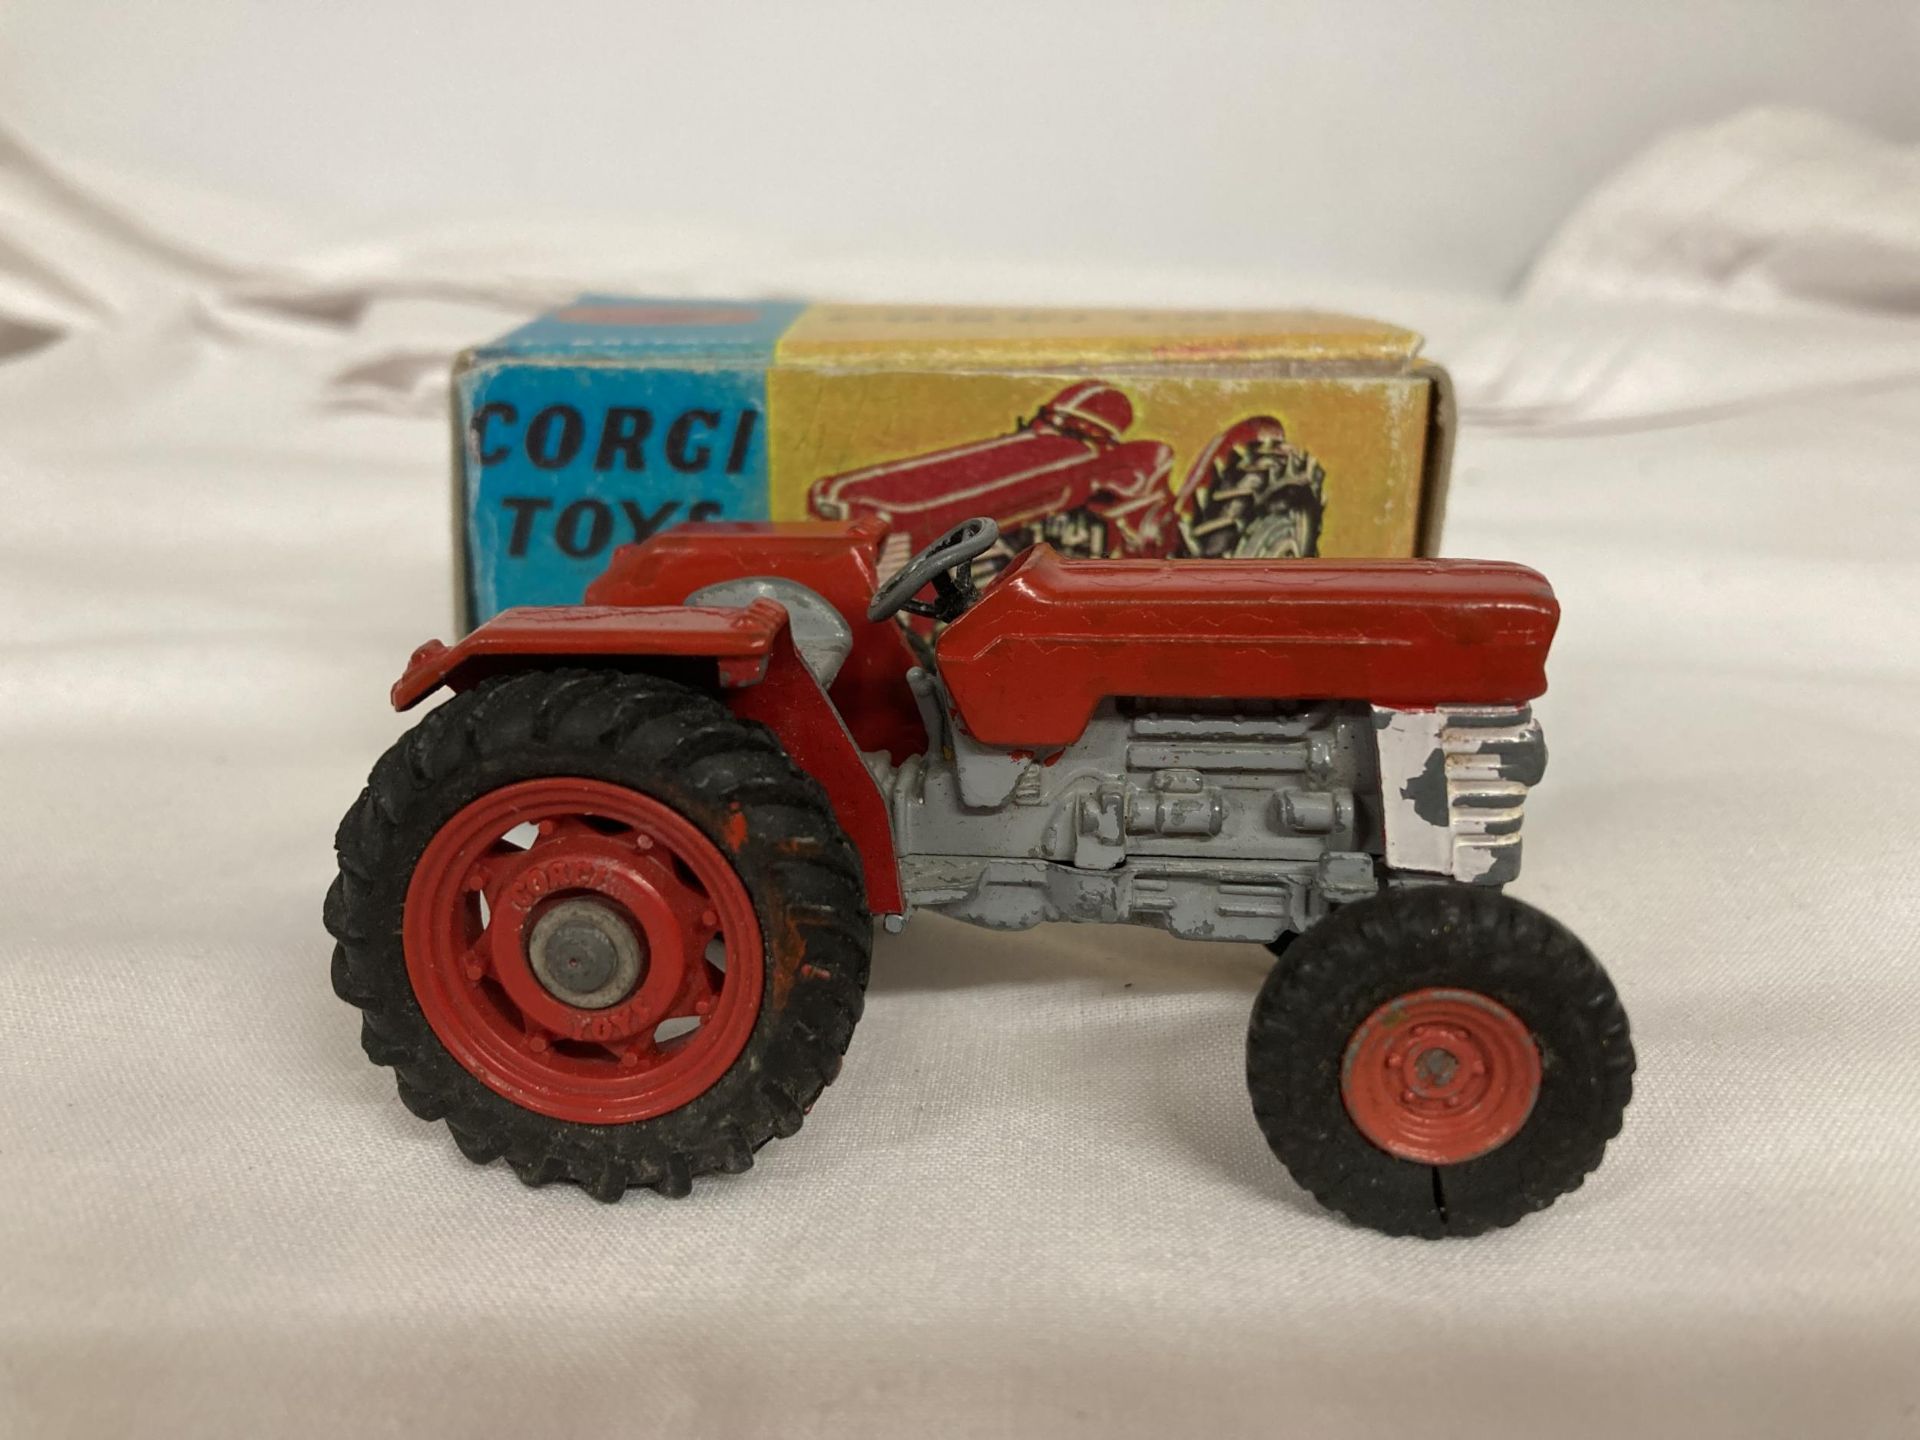 TWO BOXED CORGI MODELS NO. 58 - BEAST CARRIER WITH ANIMALS AND NO. 50 - A MASSEY FERGUSON 65 TRACTOR - Image 3 of 3